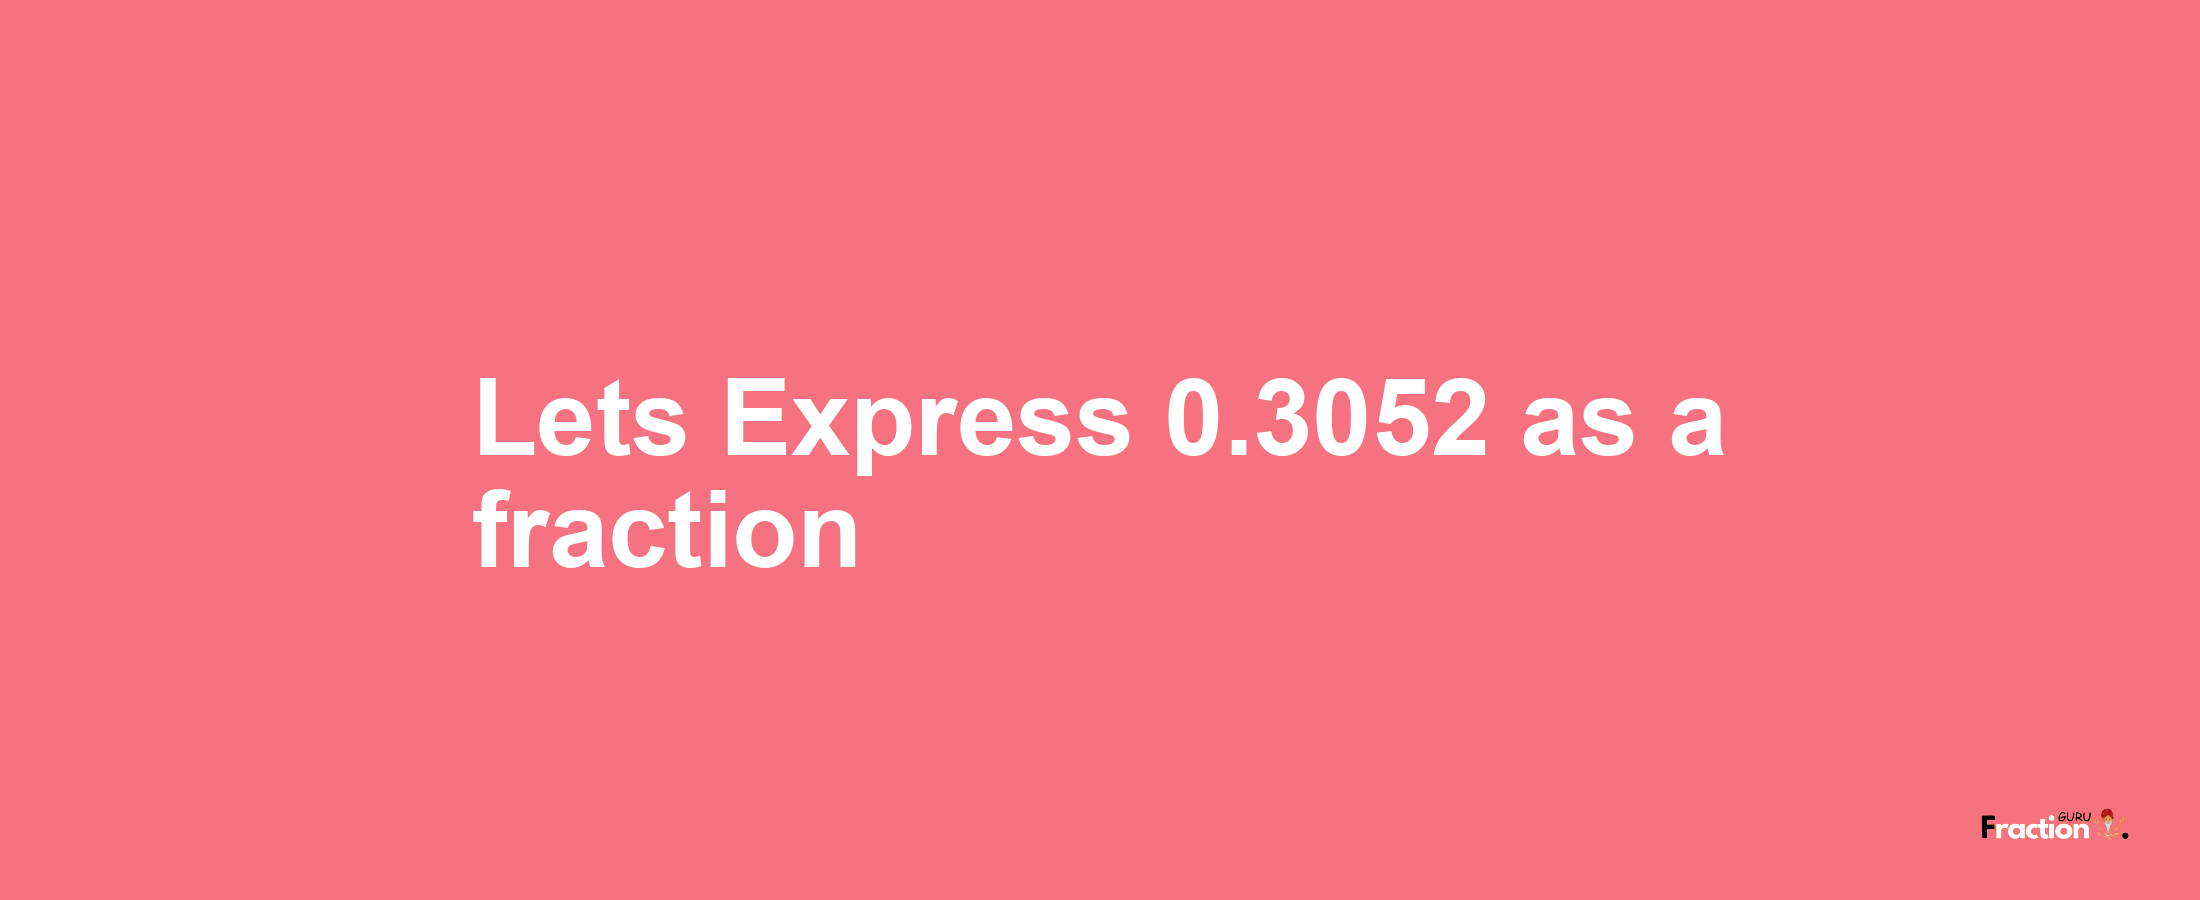 Lets Express 0.3052 as afraction